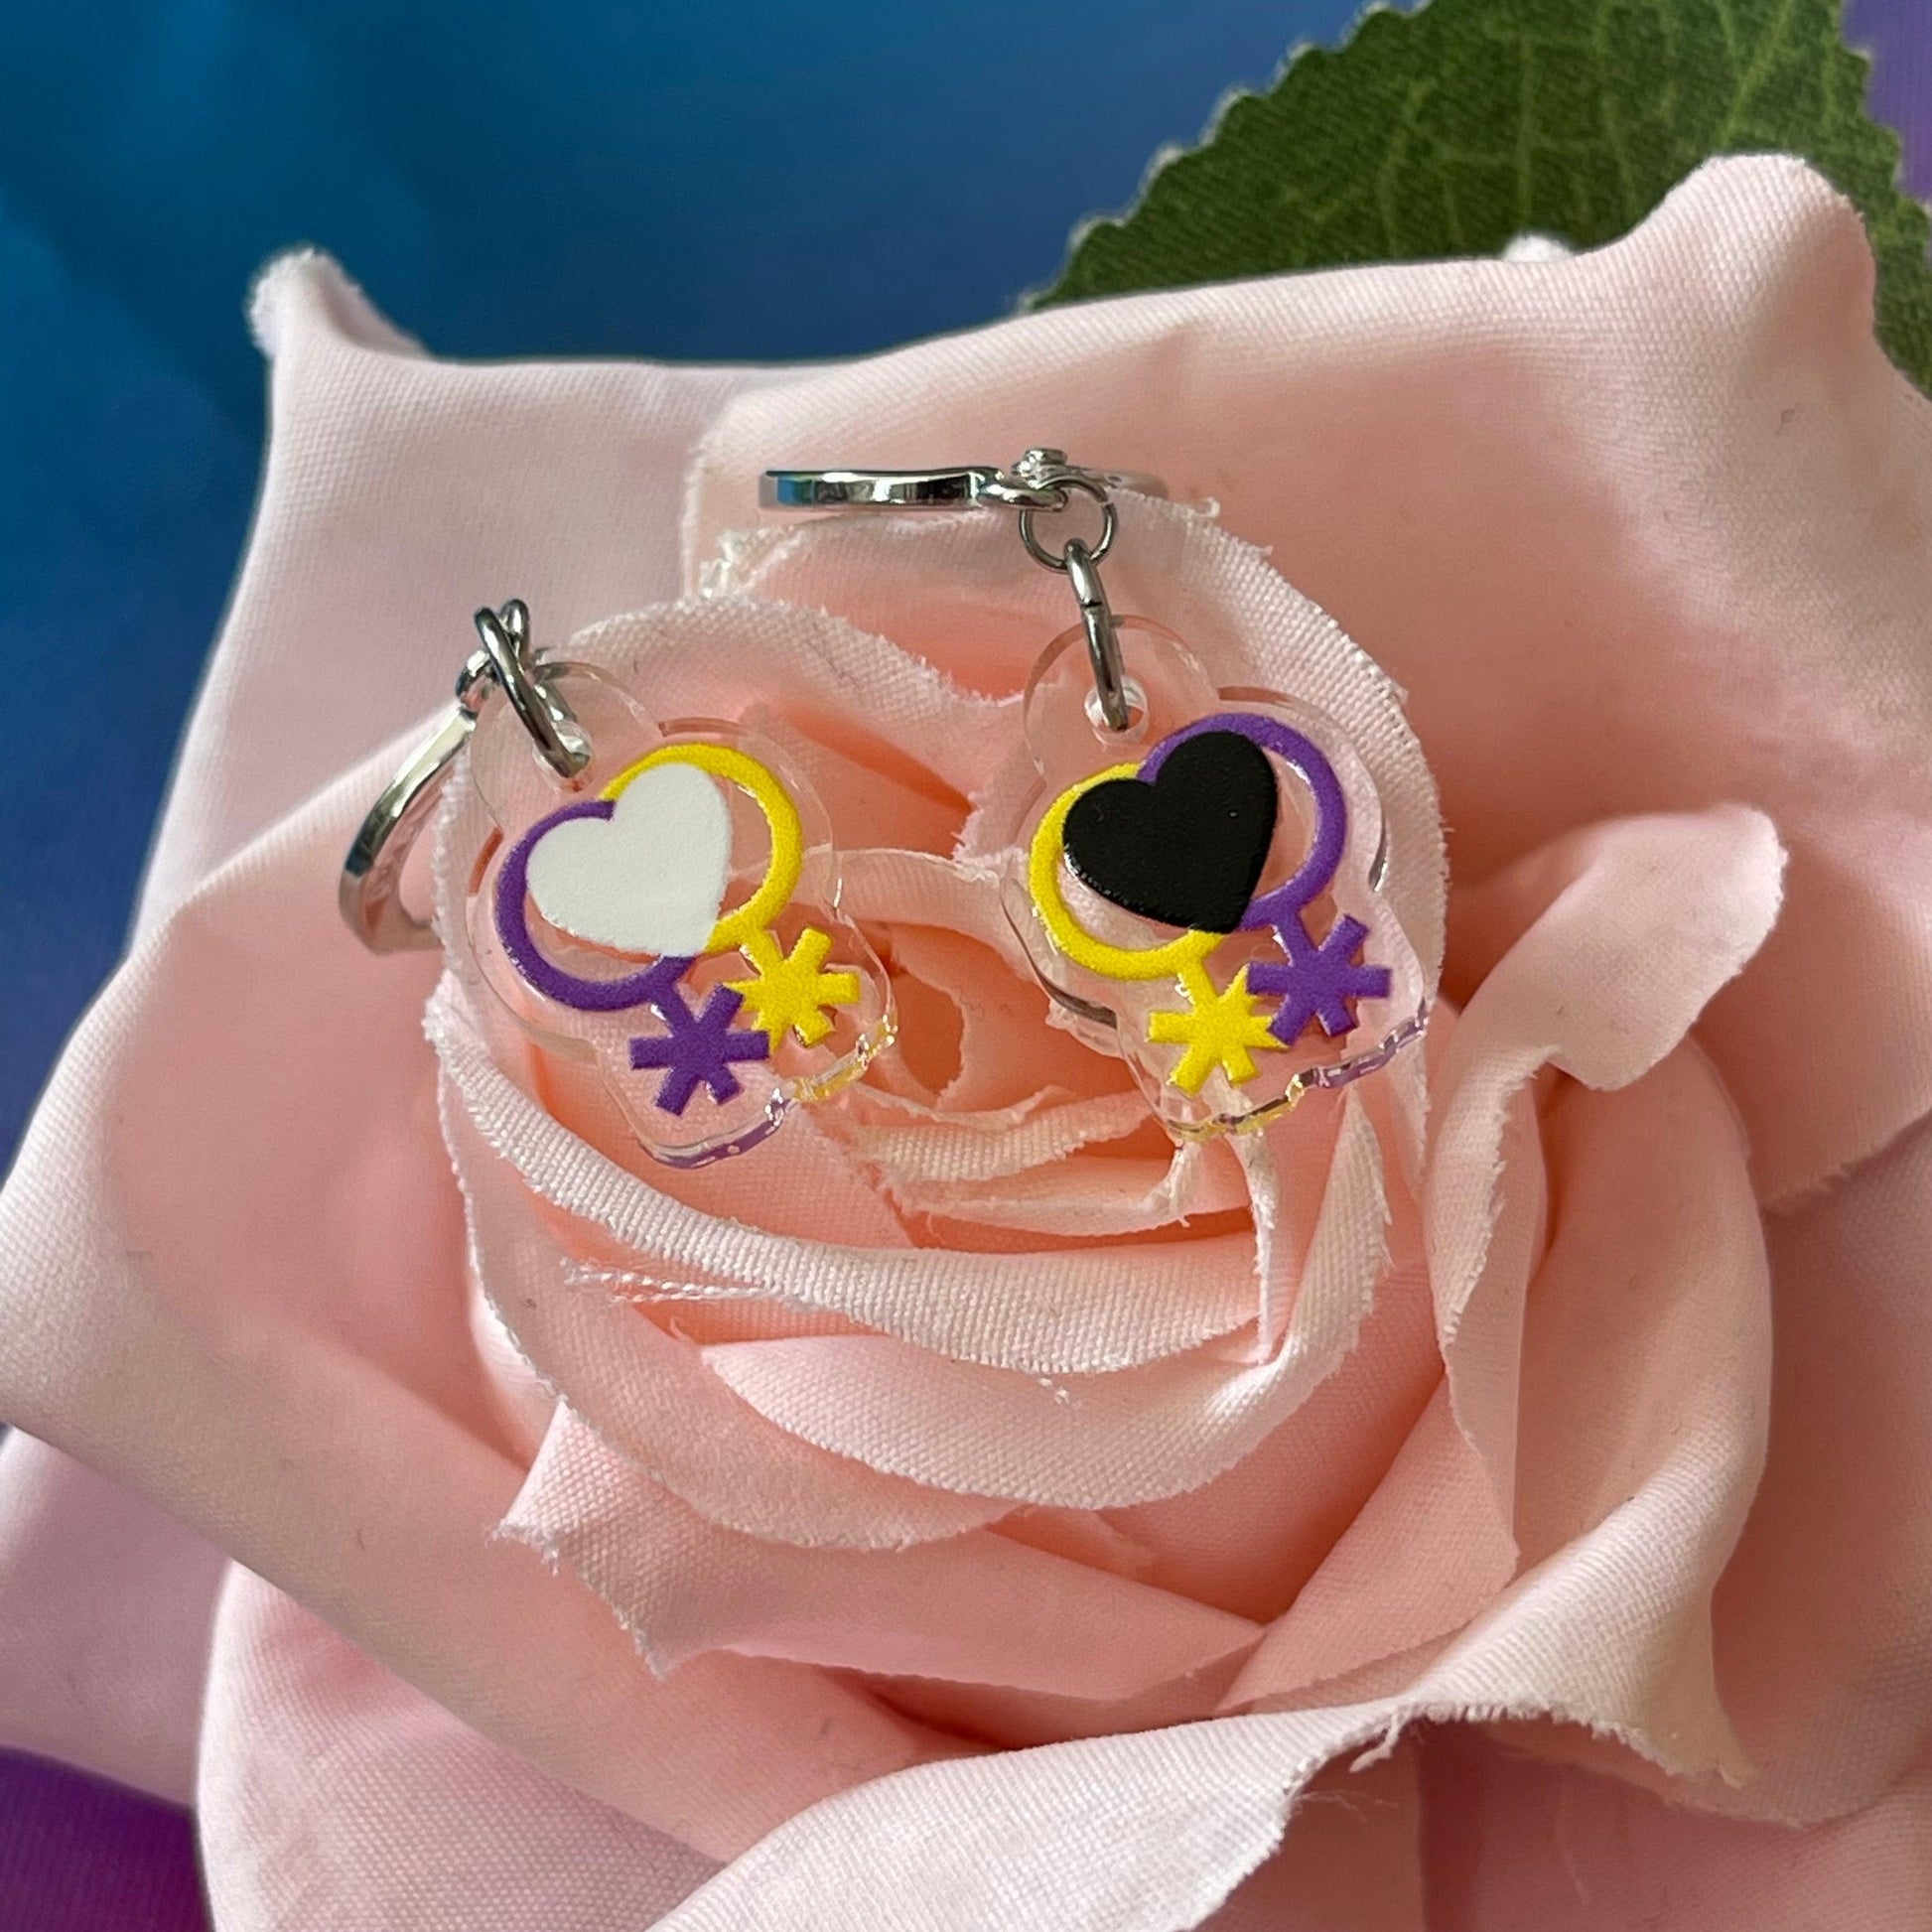 Non-binary Pride Flag Inspired Earrings - Lxyclr Authentic